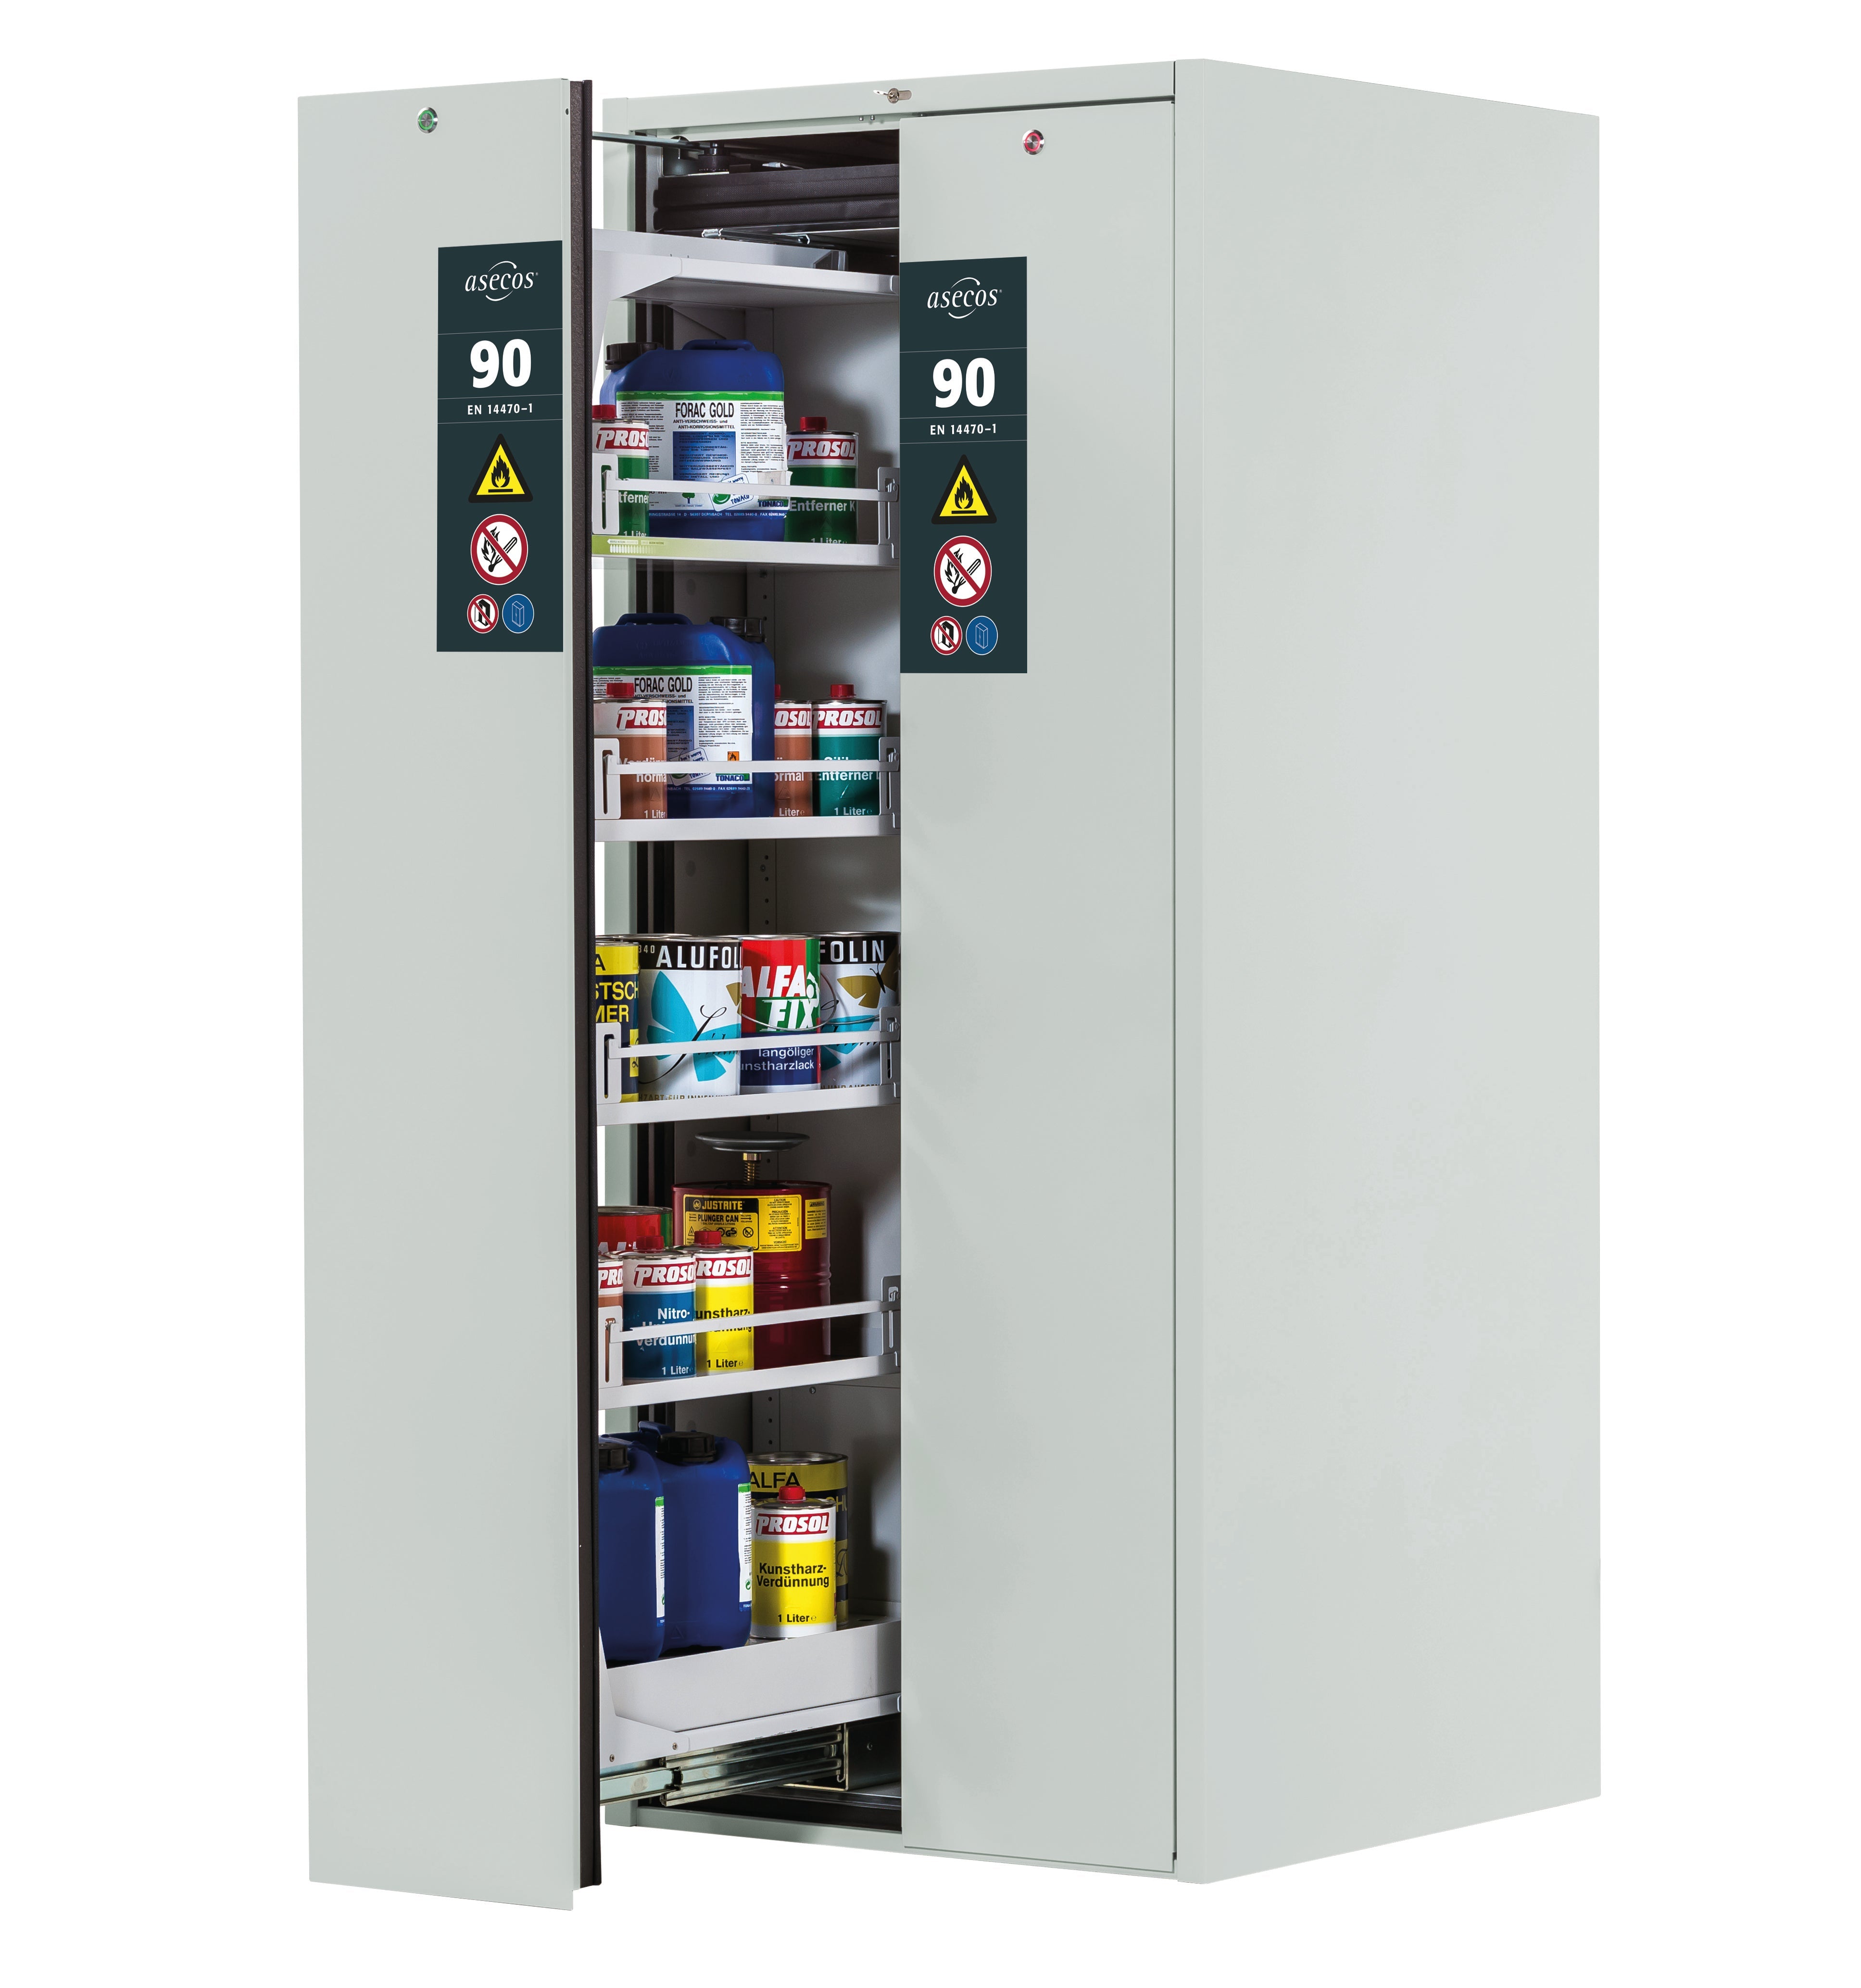 Type 90 safety cabinet V-MOVE-90 model V90.196.081.VDAC:0012 in light gray RAL 7035 with 4x standard shelves (sheet steel)